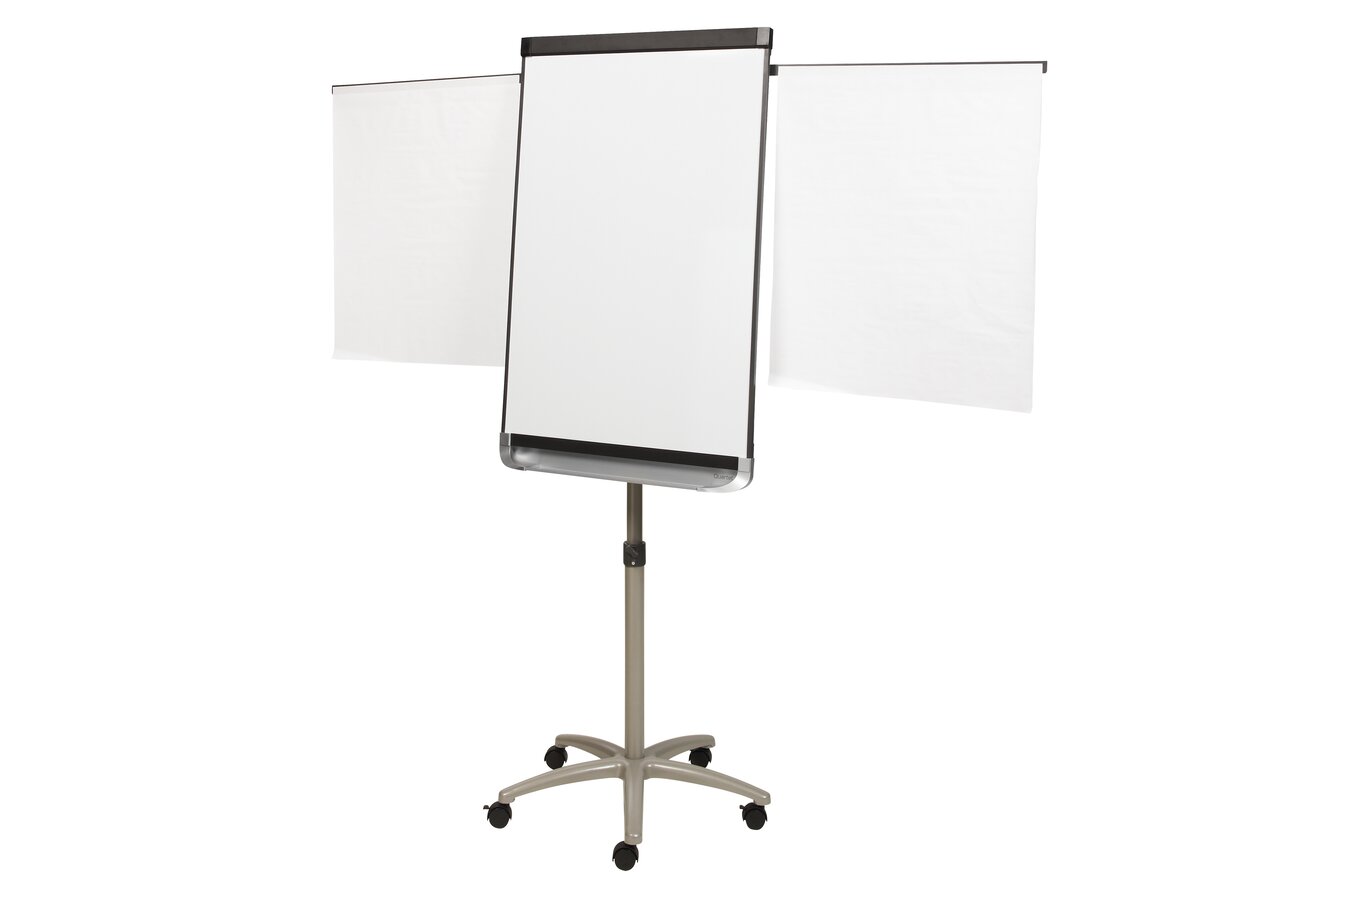 Presentation and Display Easels